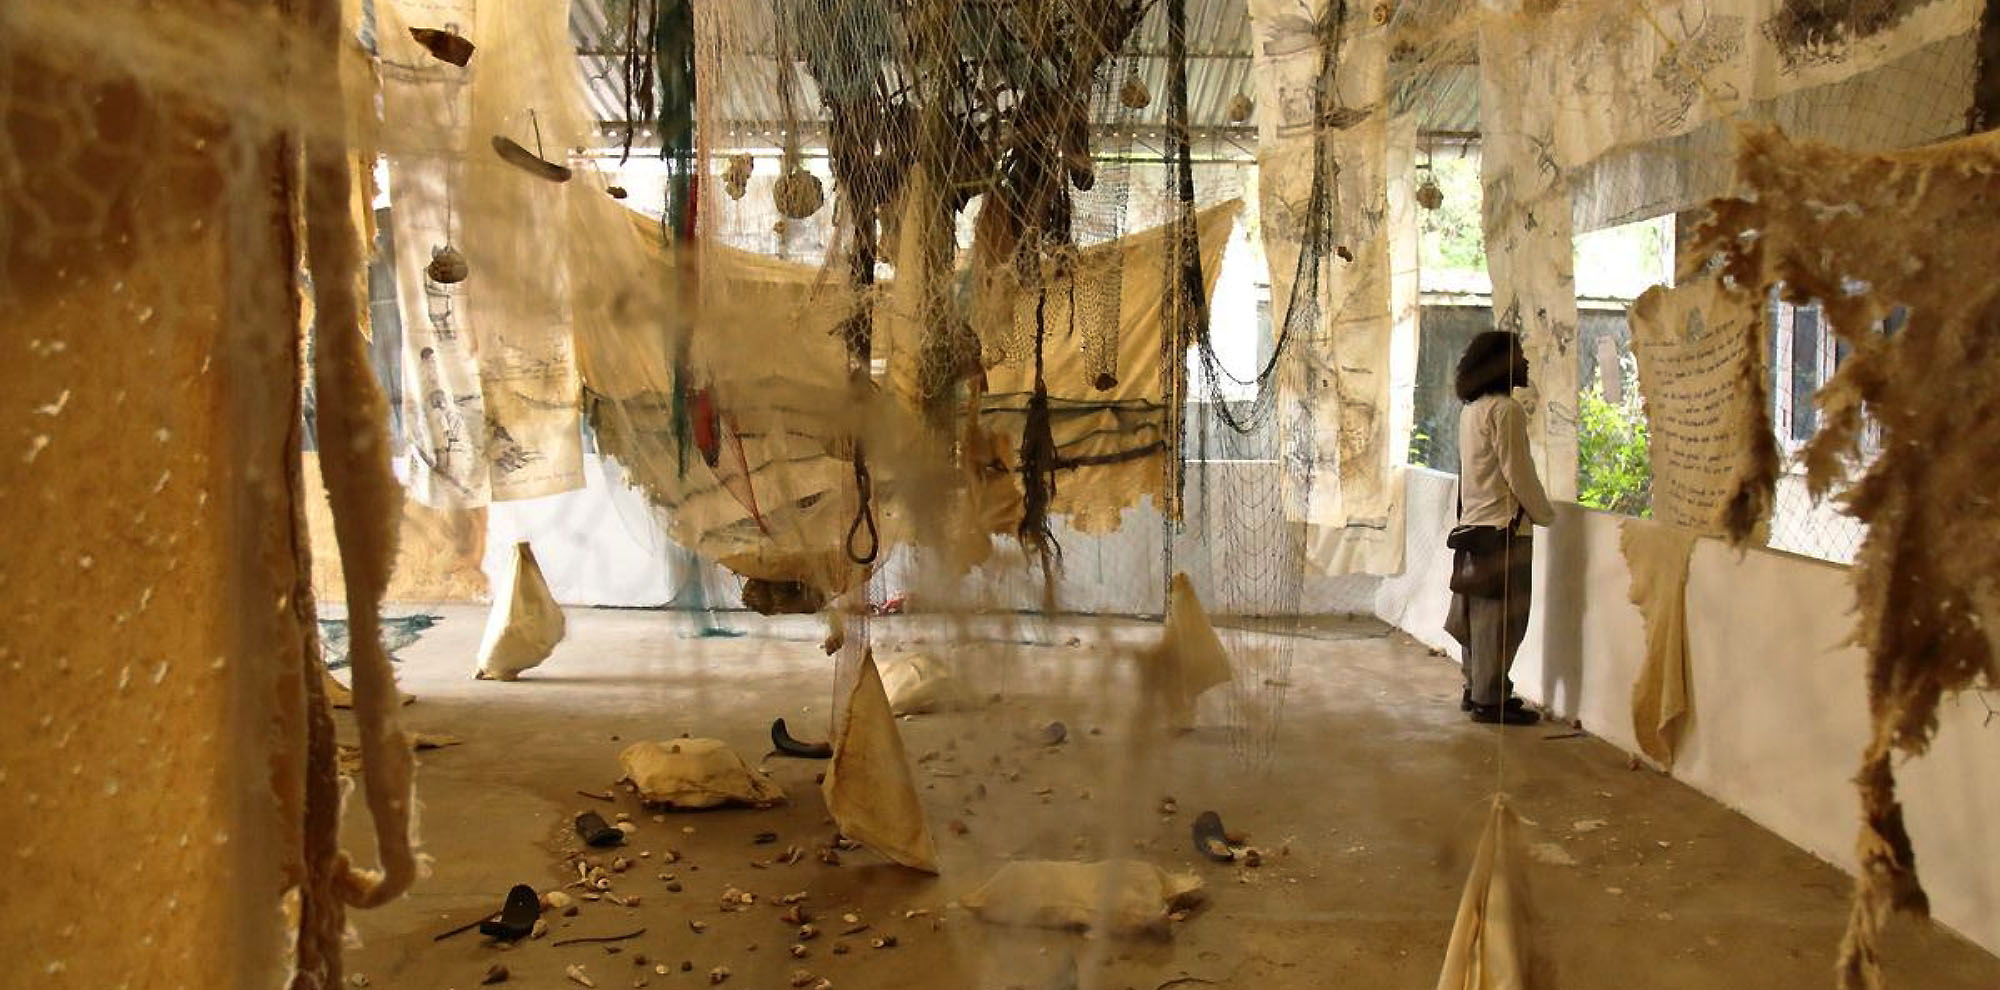 A cluster of hanging cloth, fishnets and sacks arranged chaotically on an open balcony with a man on the right.